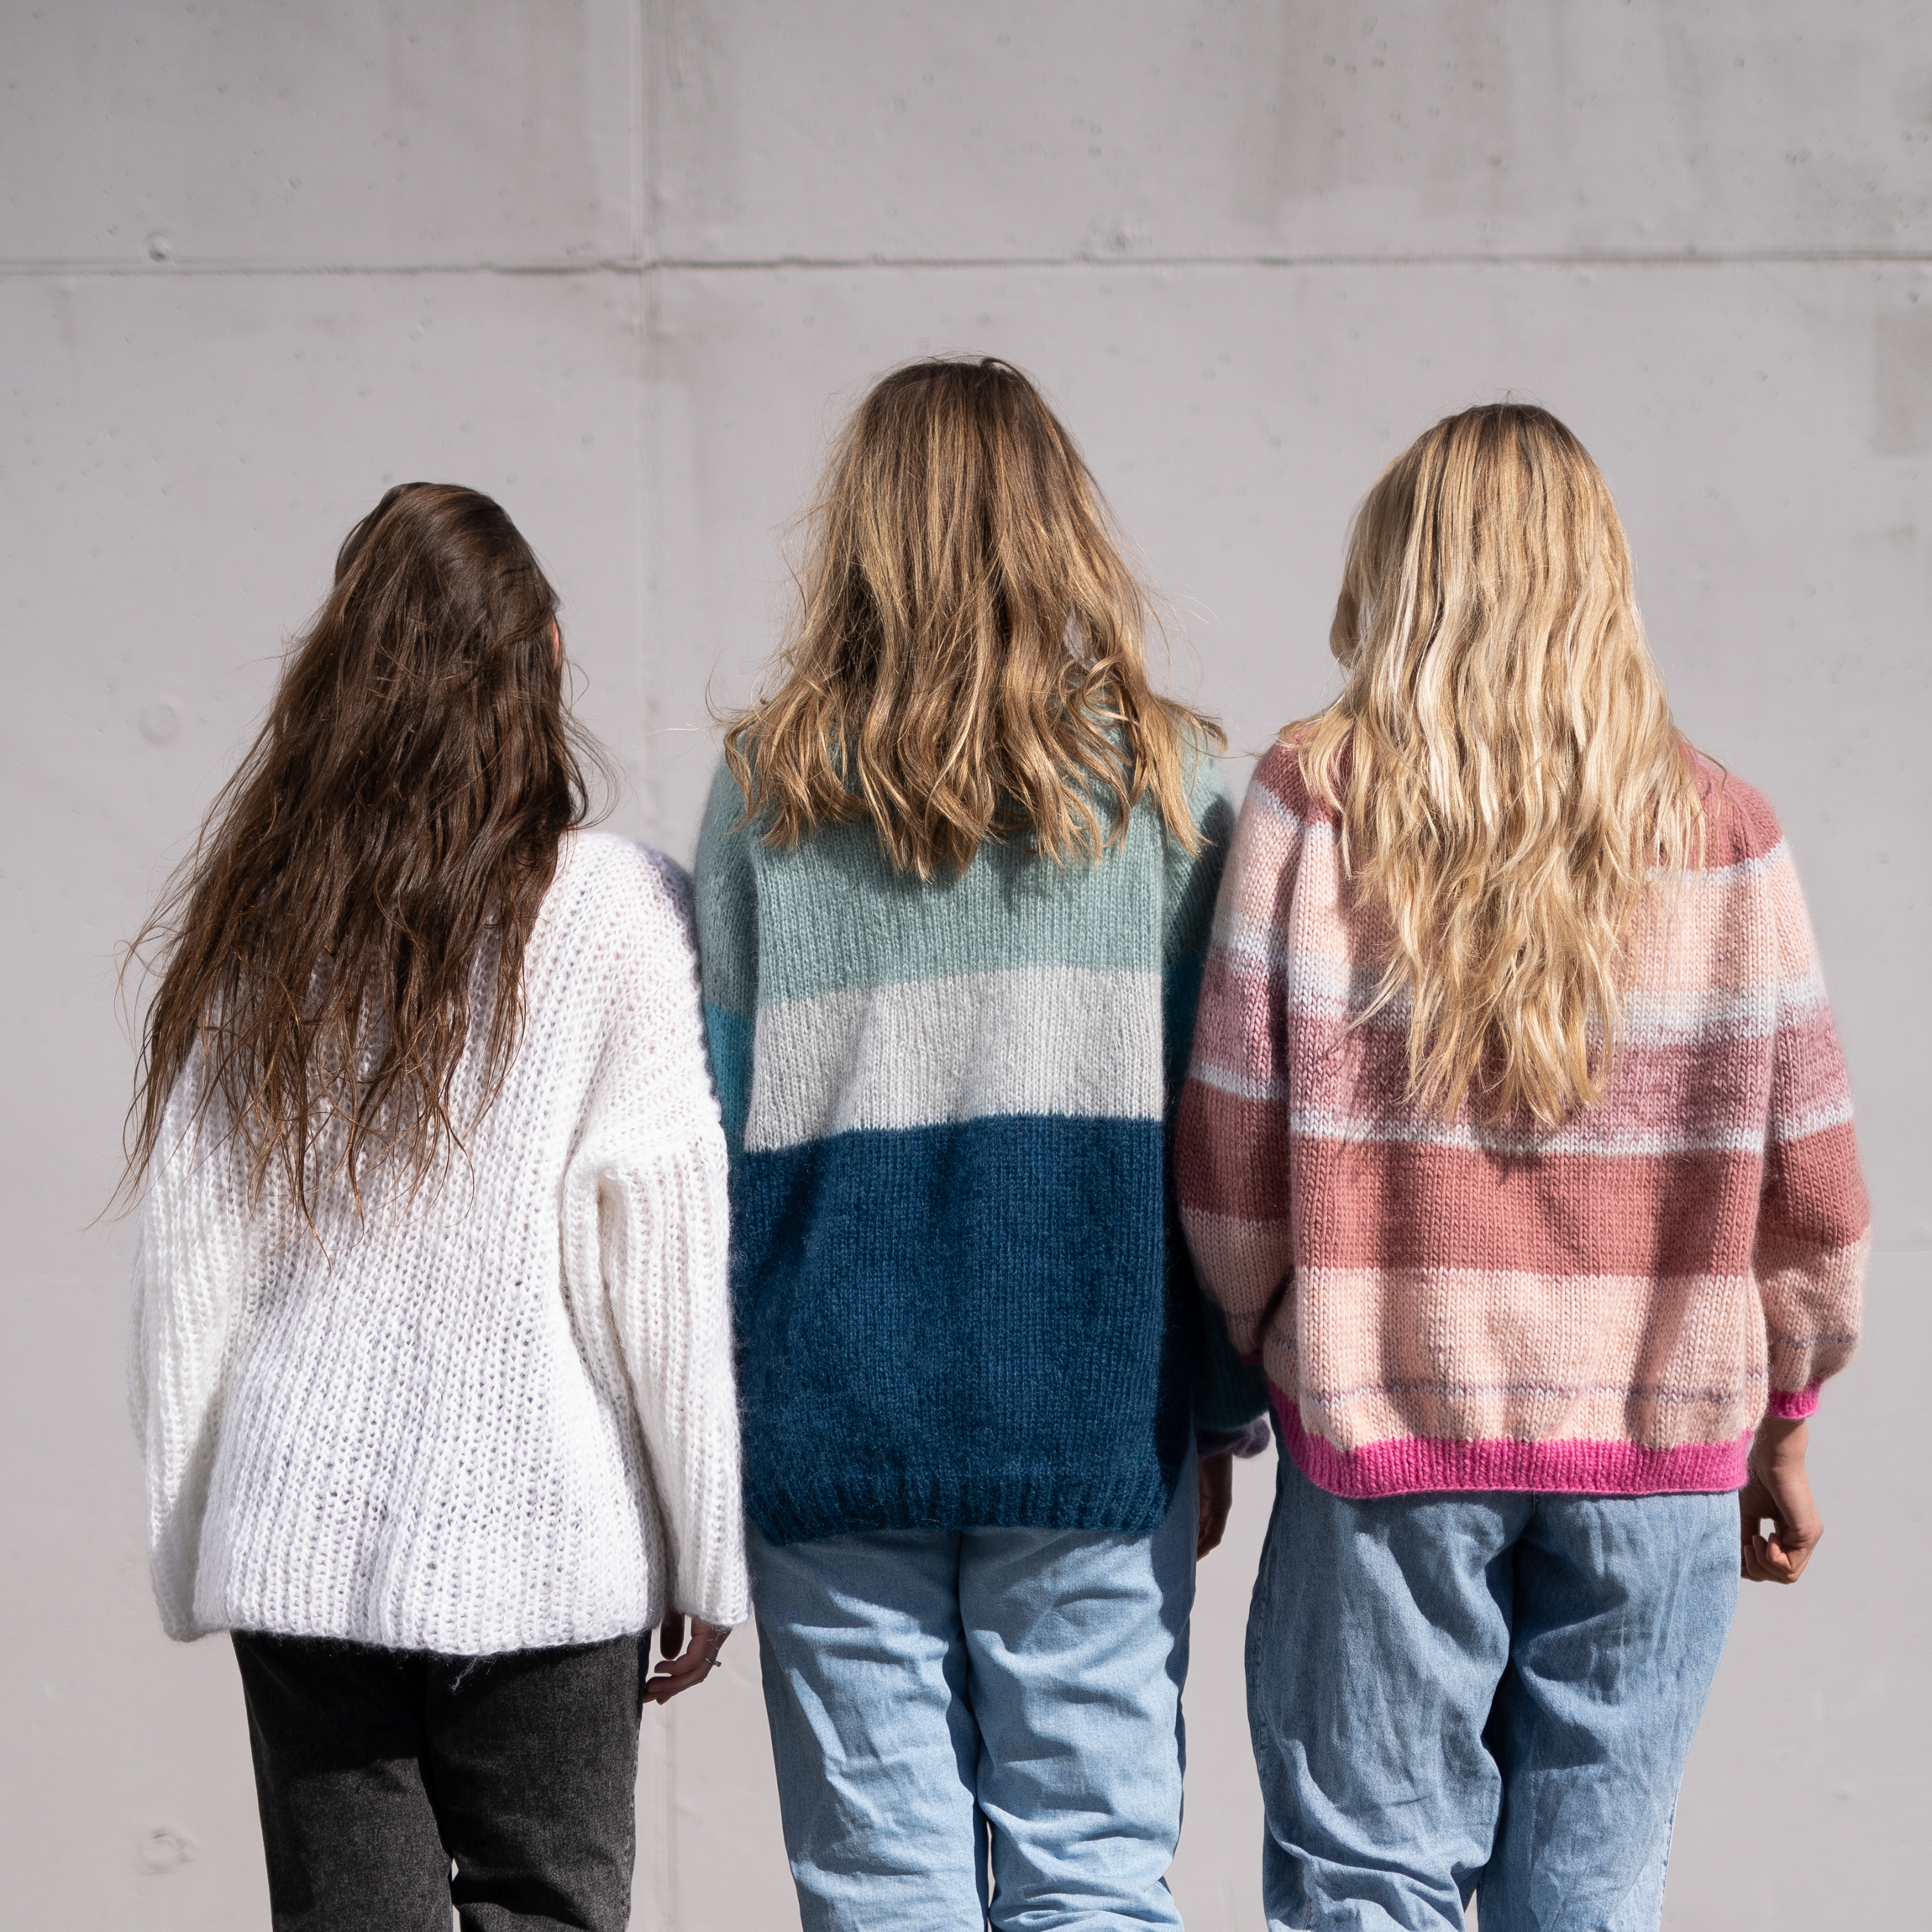  - Jubelsweater Mohair | Mohair sweater pattern - by HipKnitShop - 12/05/2019